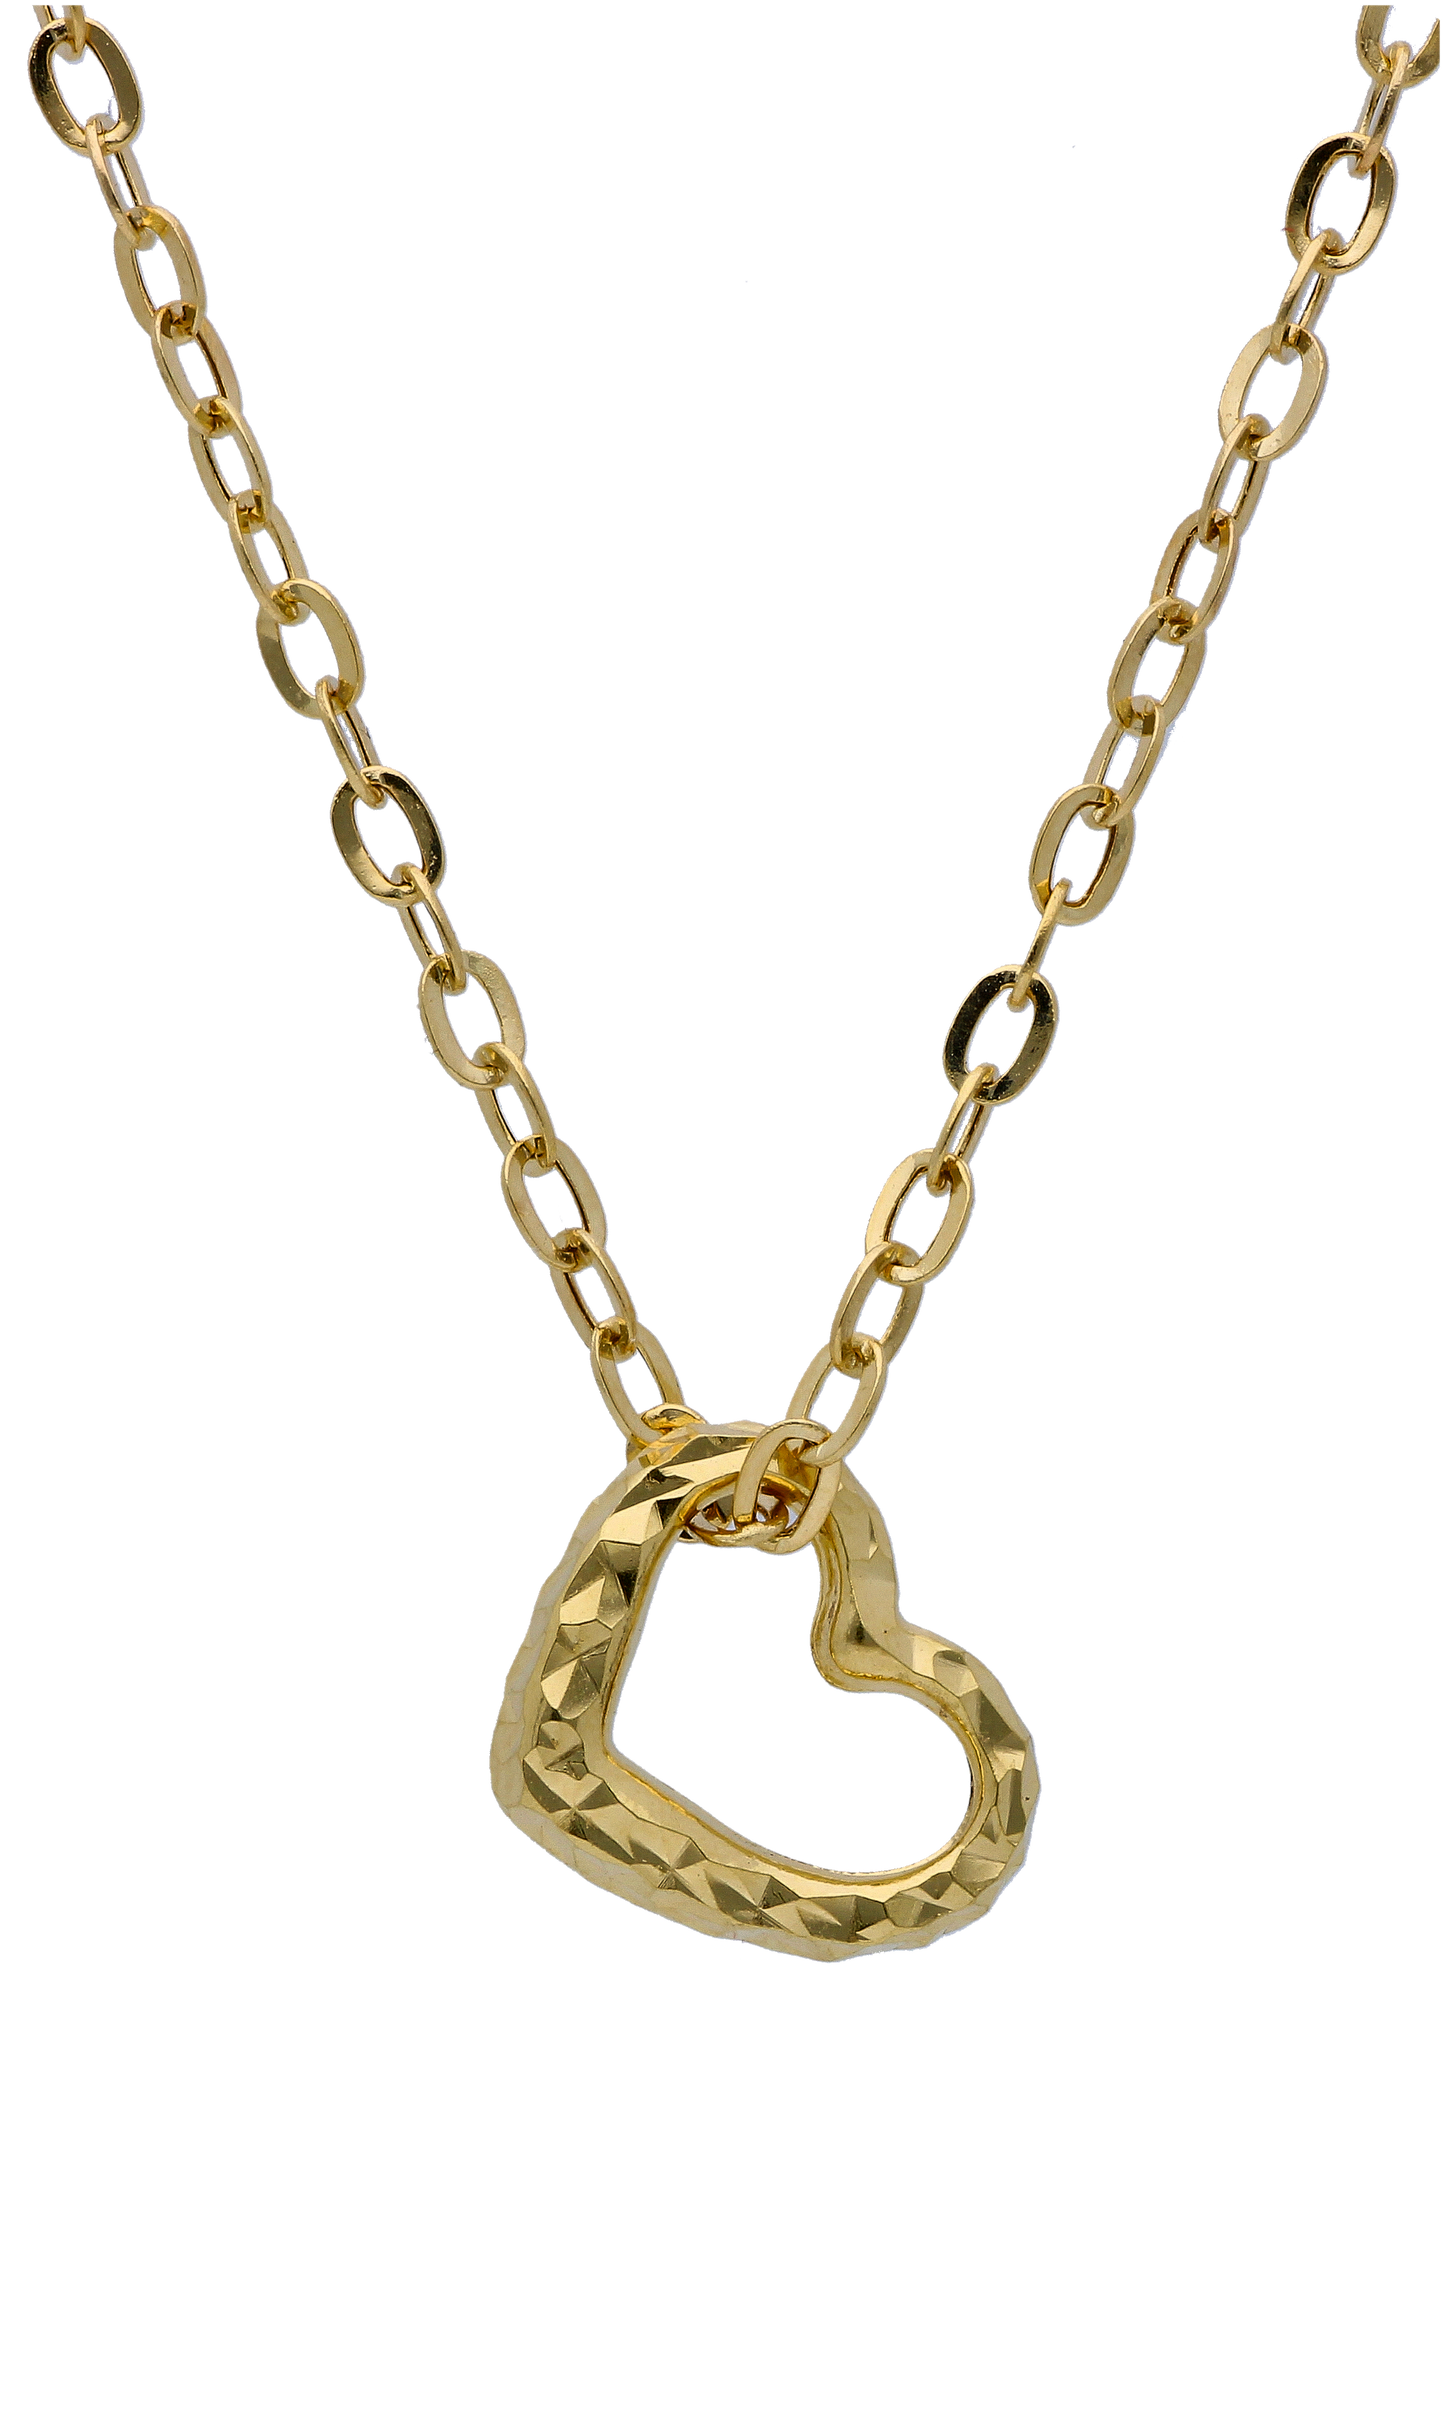 Gold Necklace (Chain with Hollow Heart Pendant) 18KT - FKJNKL18KU6306